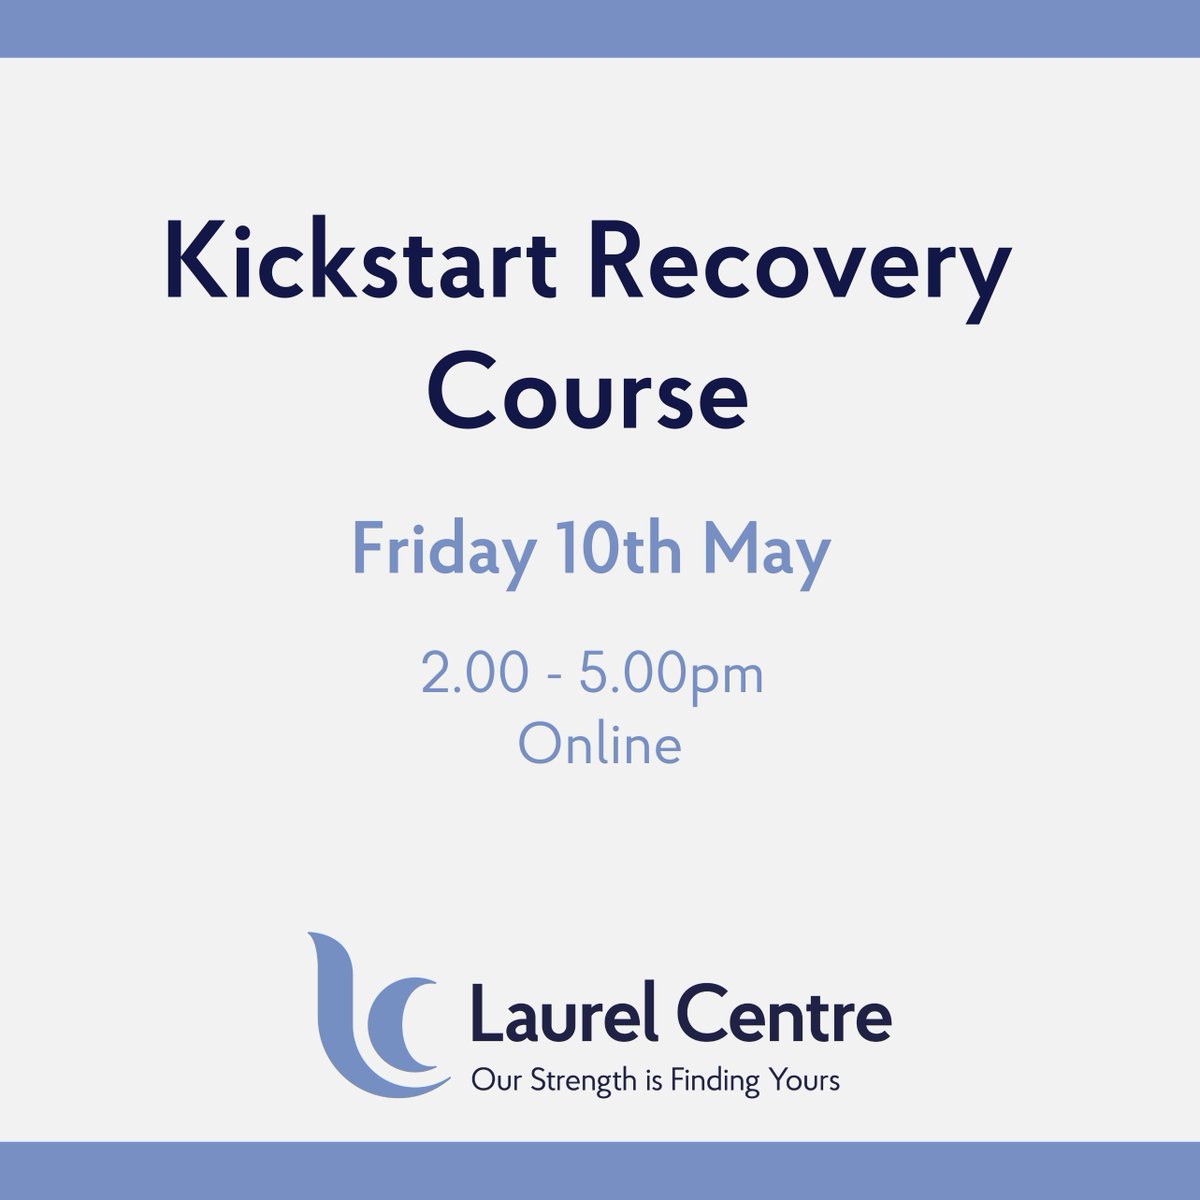 The Laurel Centre's Kickstart Recovery Course is running next month and we have limited spaces available. To book your place, click here buff.ly/3Jlb86H